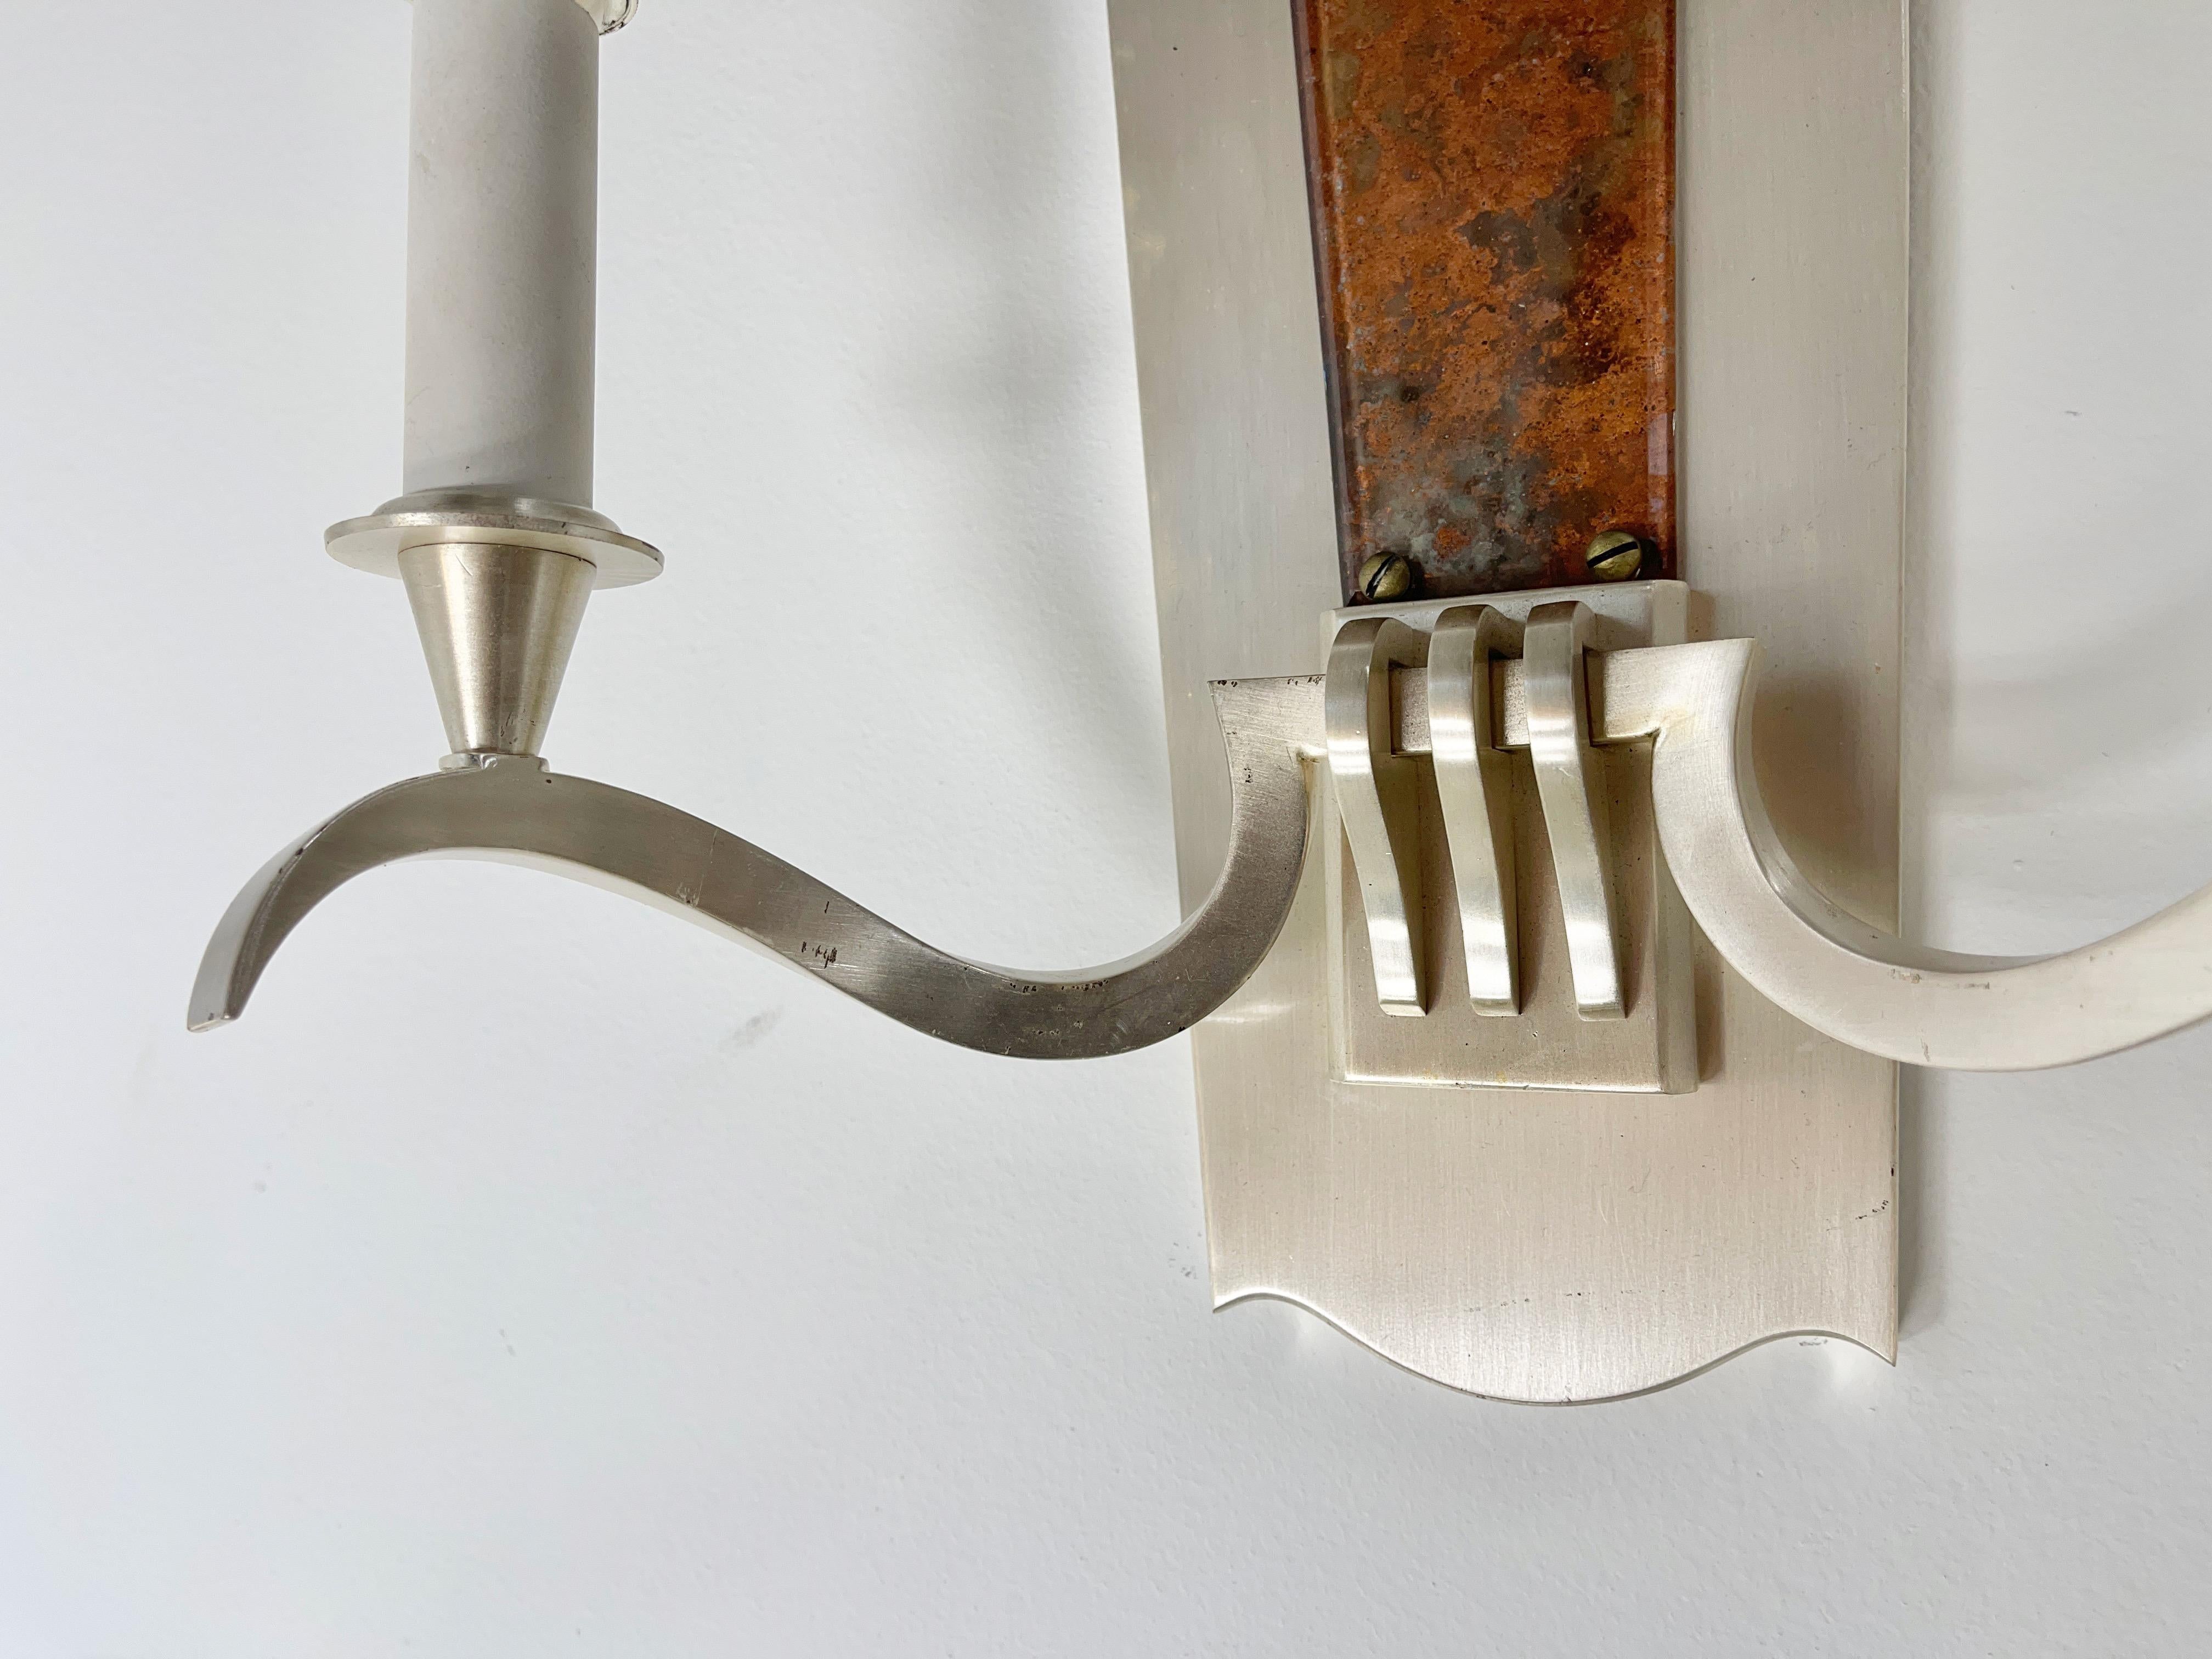 Pair of Genet et Michon Sconces in Brushed Nickel and Eglomise For Sale 5